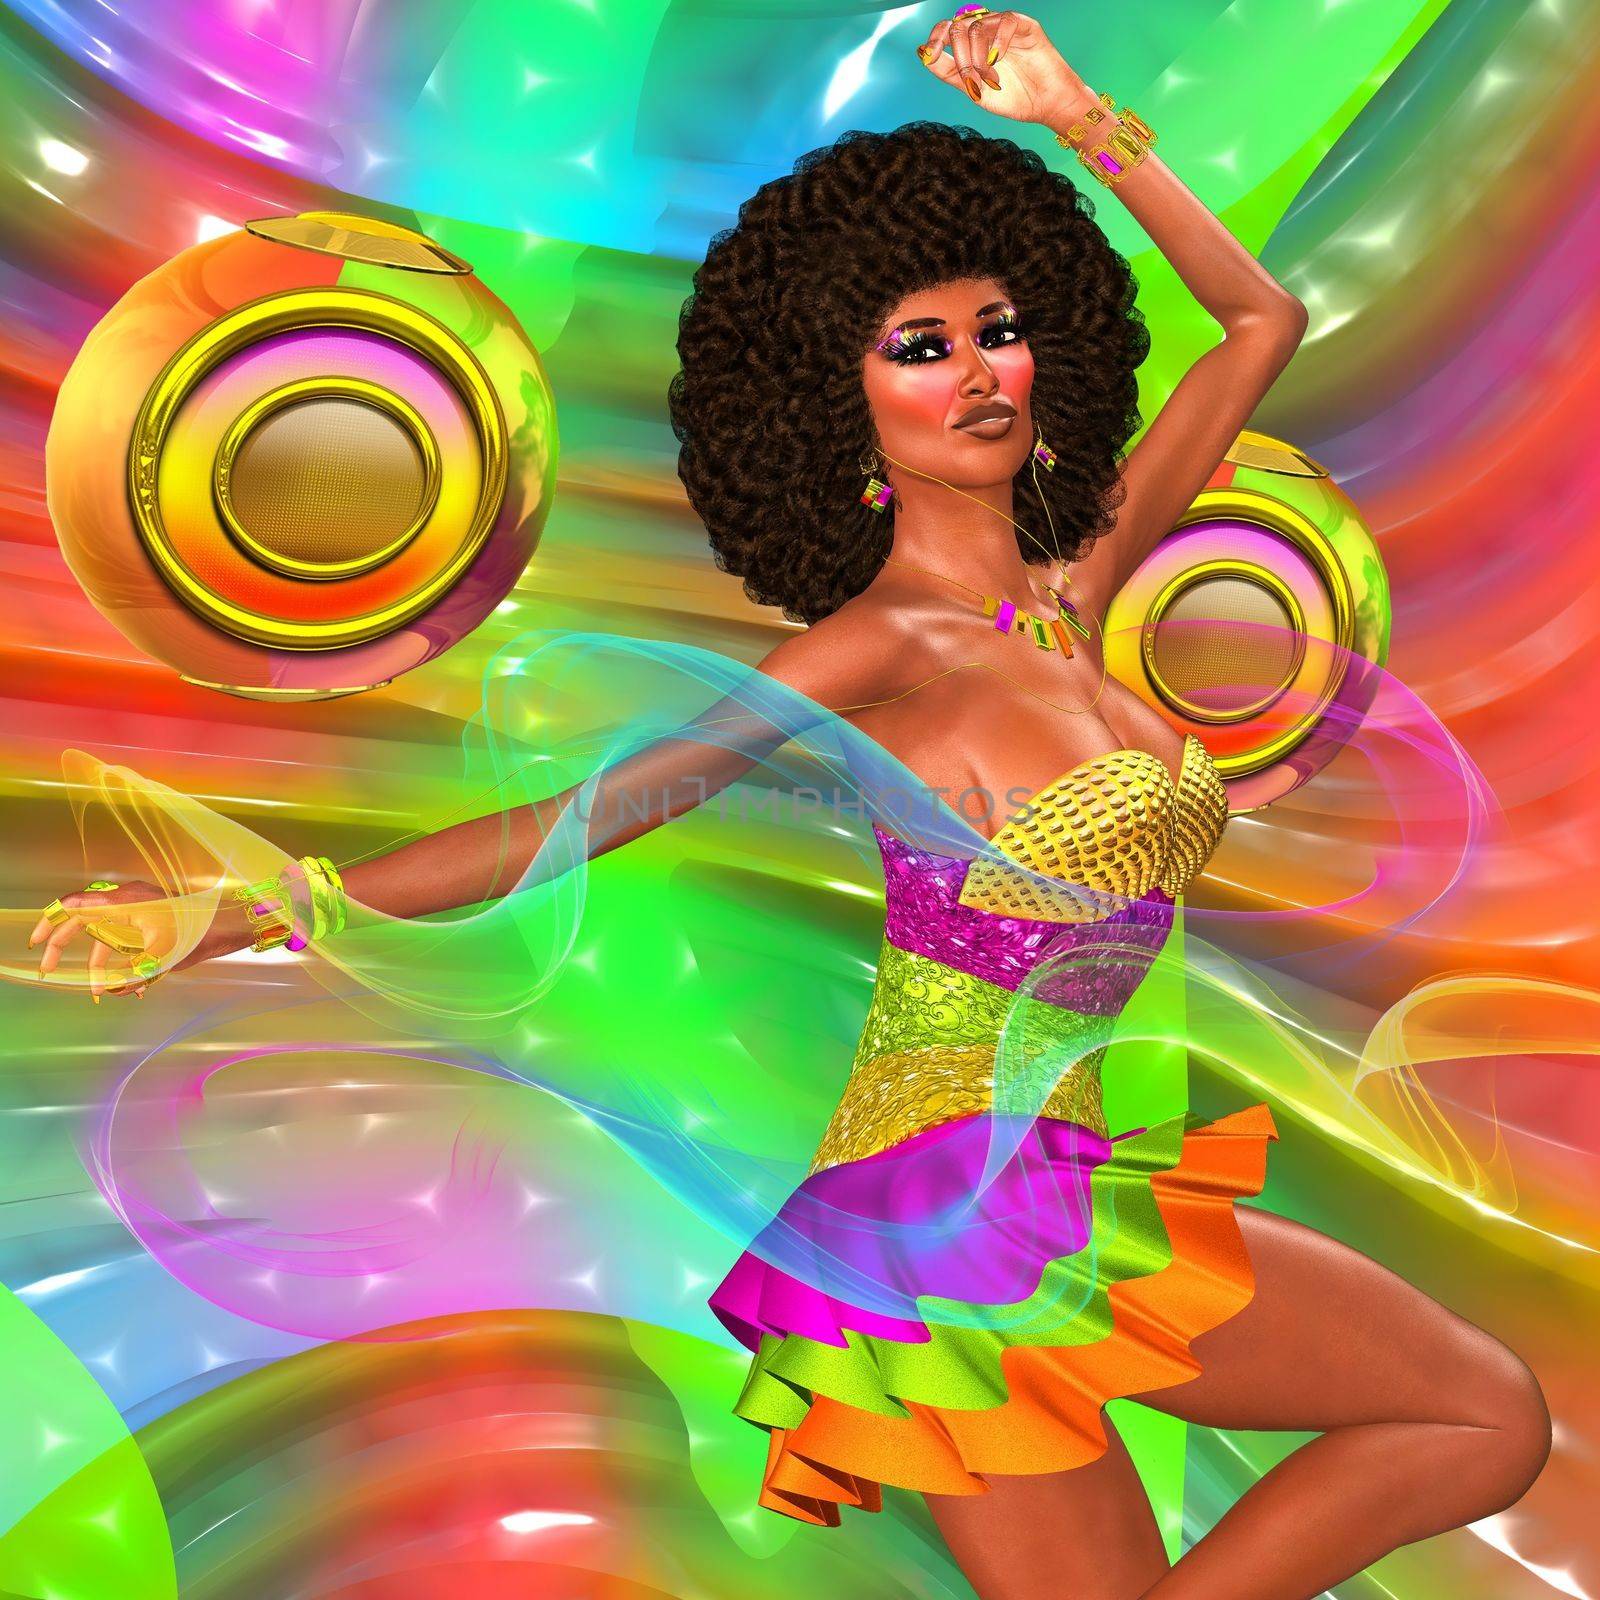 Disco dancing girl on abstract background with two gold speakers. She dances to the dj music with her retro afro and short skirt making a fashion statement.